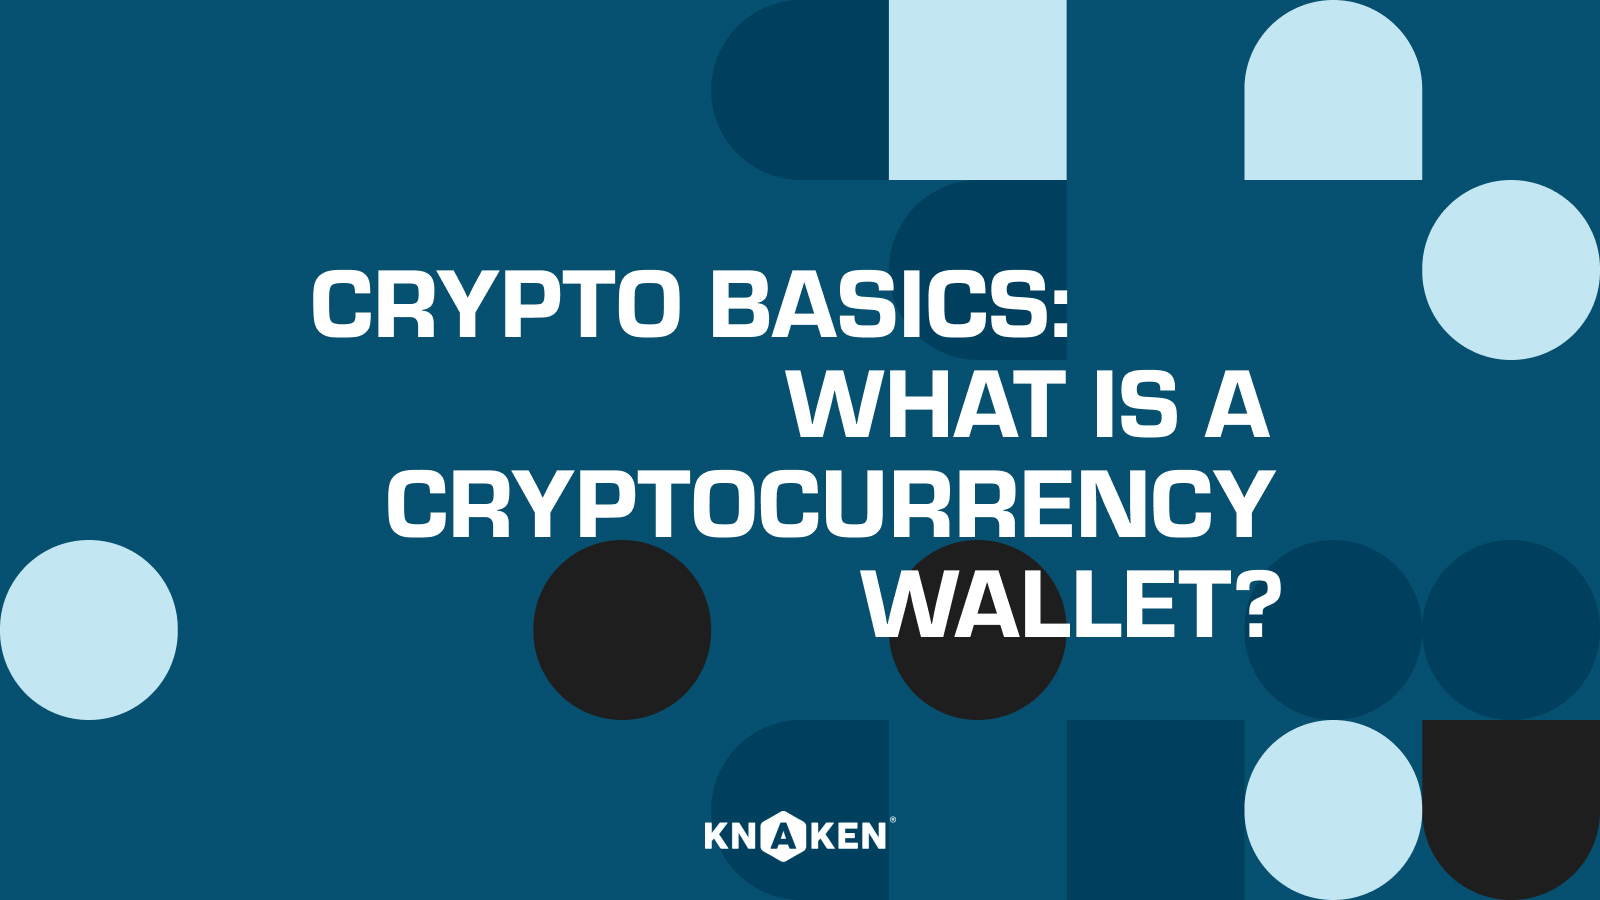 Crypto basics: What is a cryptocurrency wallet?